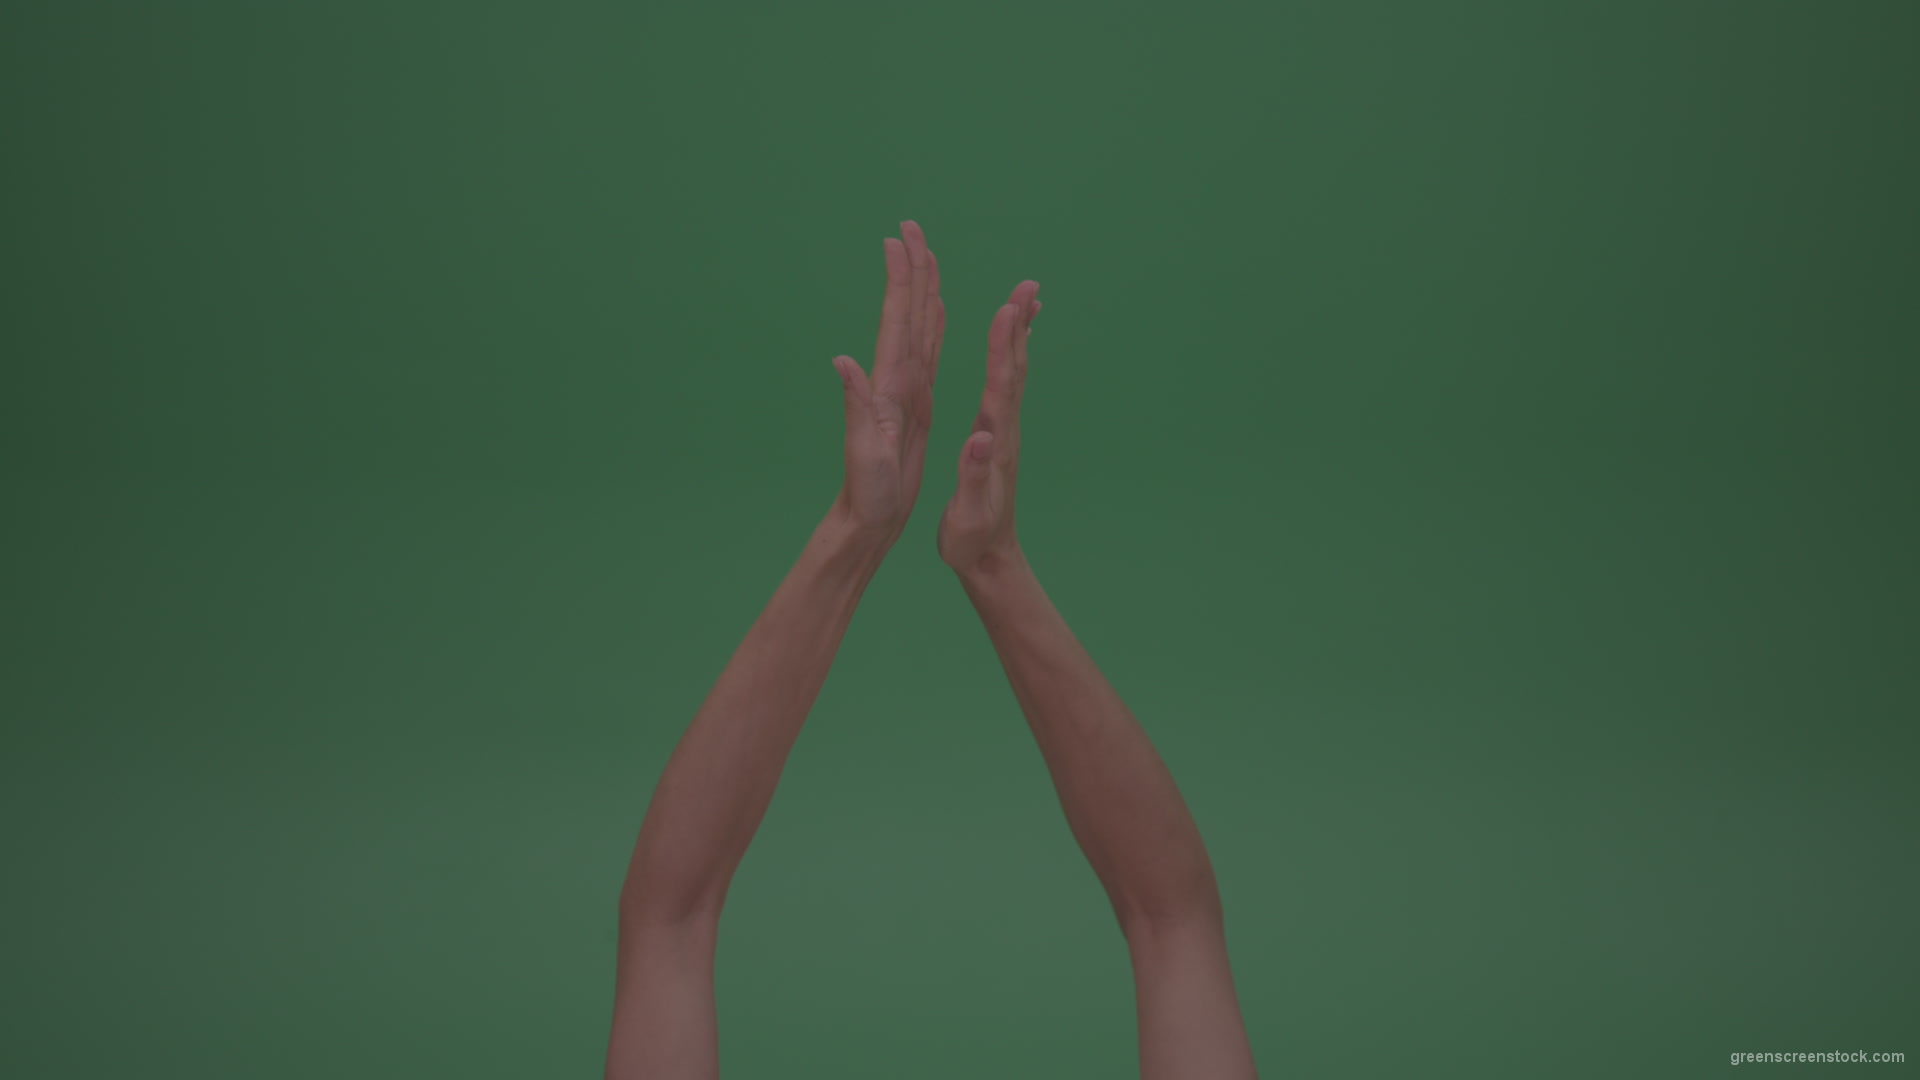 Rapidly-Clapping-Young-FemaleHands-Ovation-GreenScreenWall-ChromaKey-Background_004 Green Screen Stock